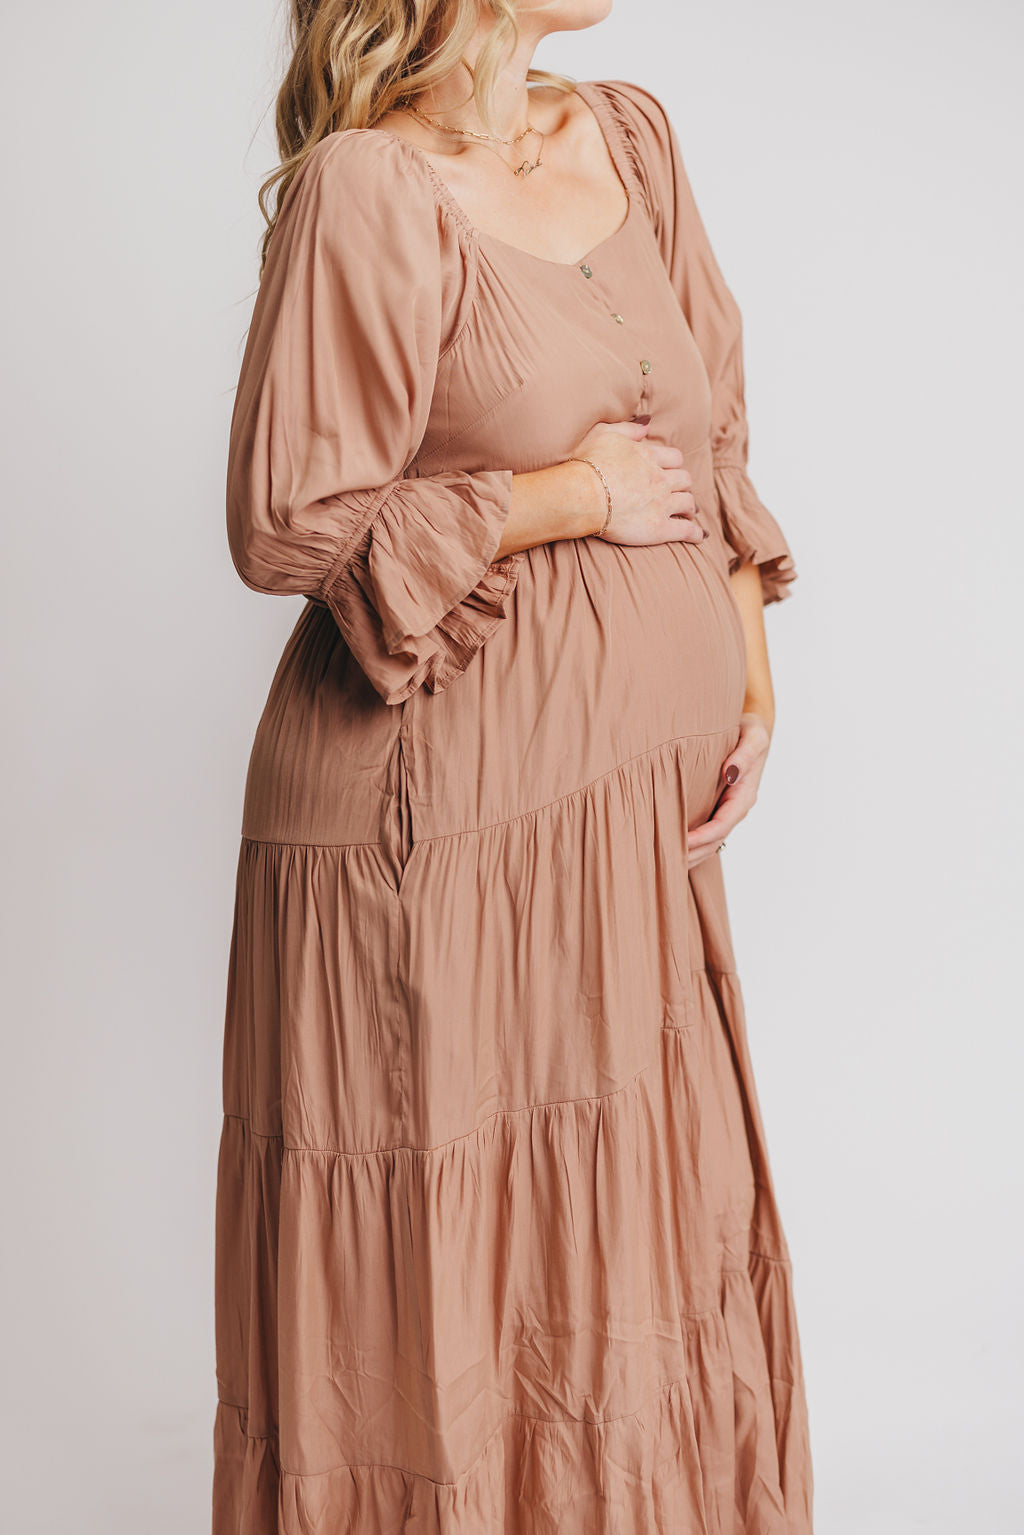 Enya Button Front Maxi Dress in Clay - Maternity and Nursing Friendly